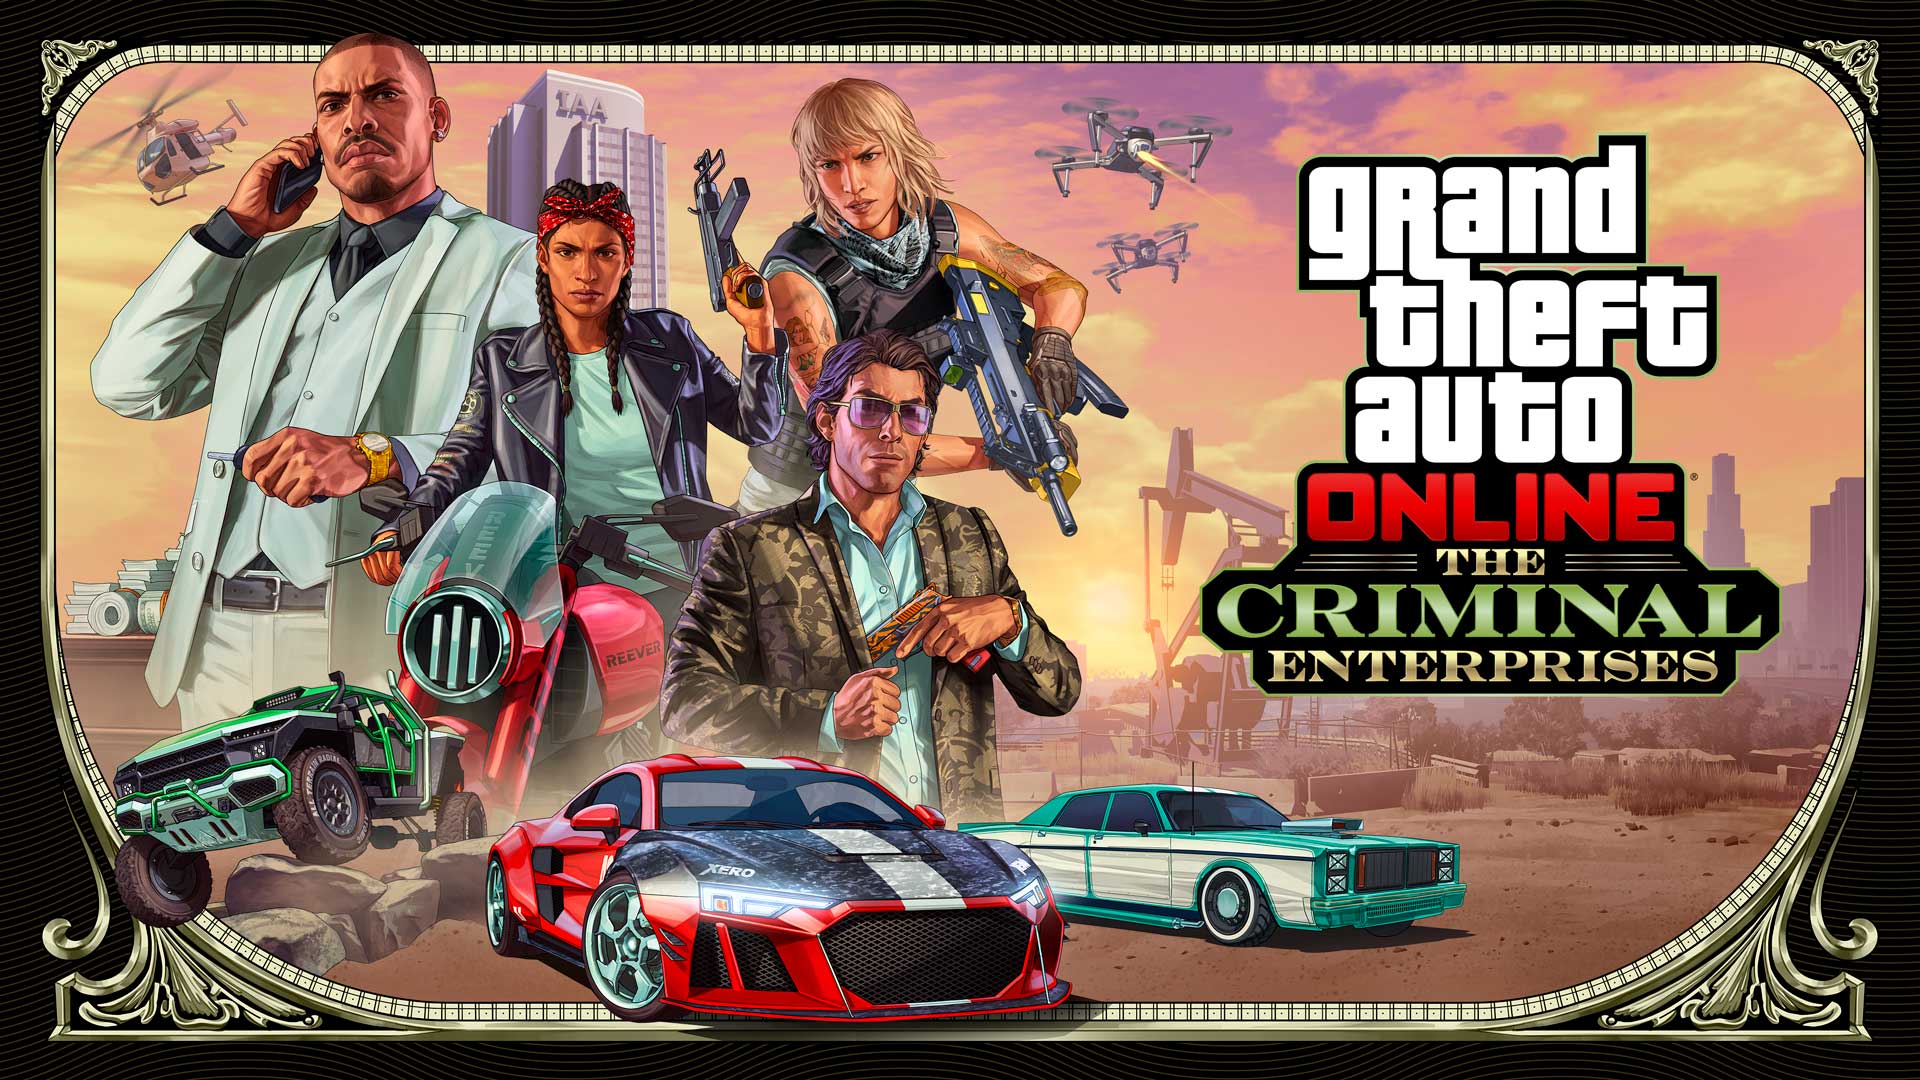 Grand Theft Auto The Criminal Enterprises update is now available